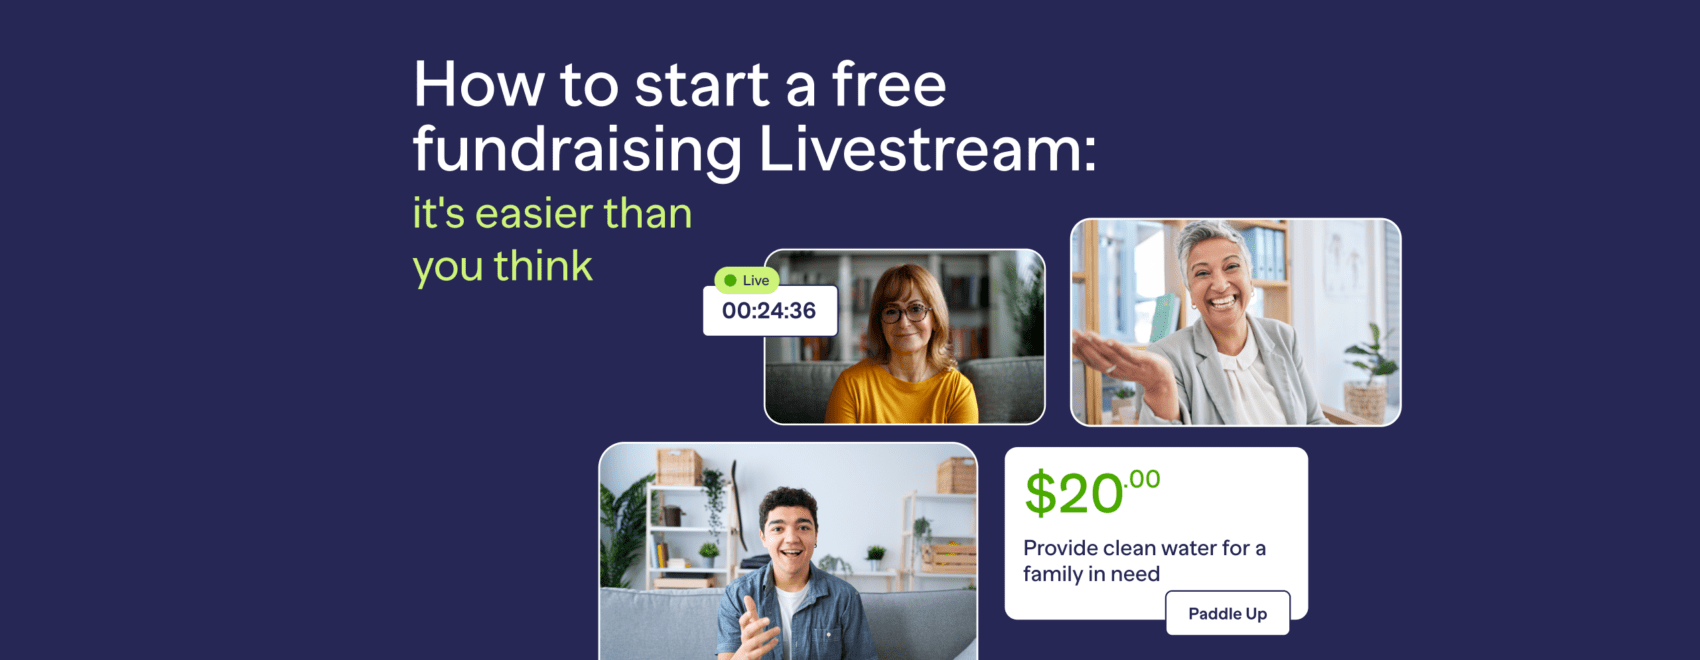 How to start a free fundraising Livestream it's easier than you think